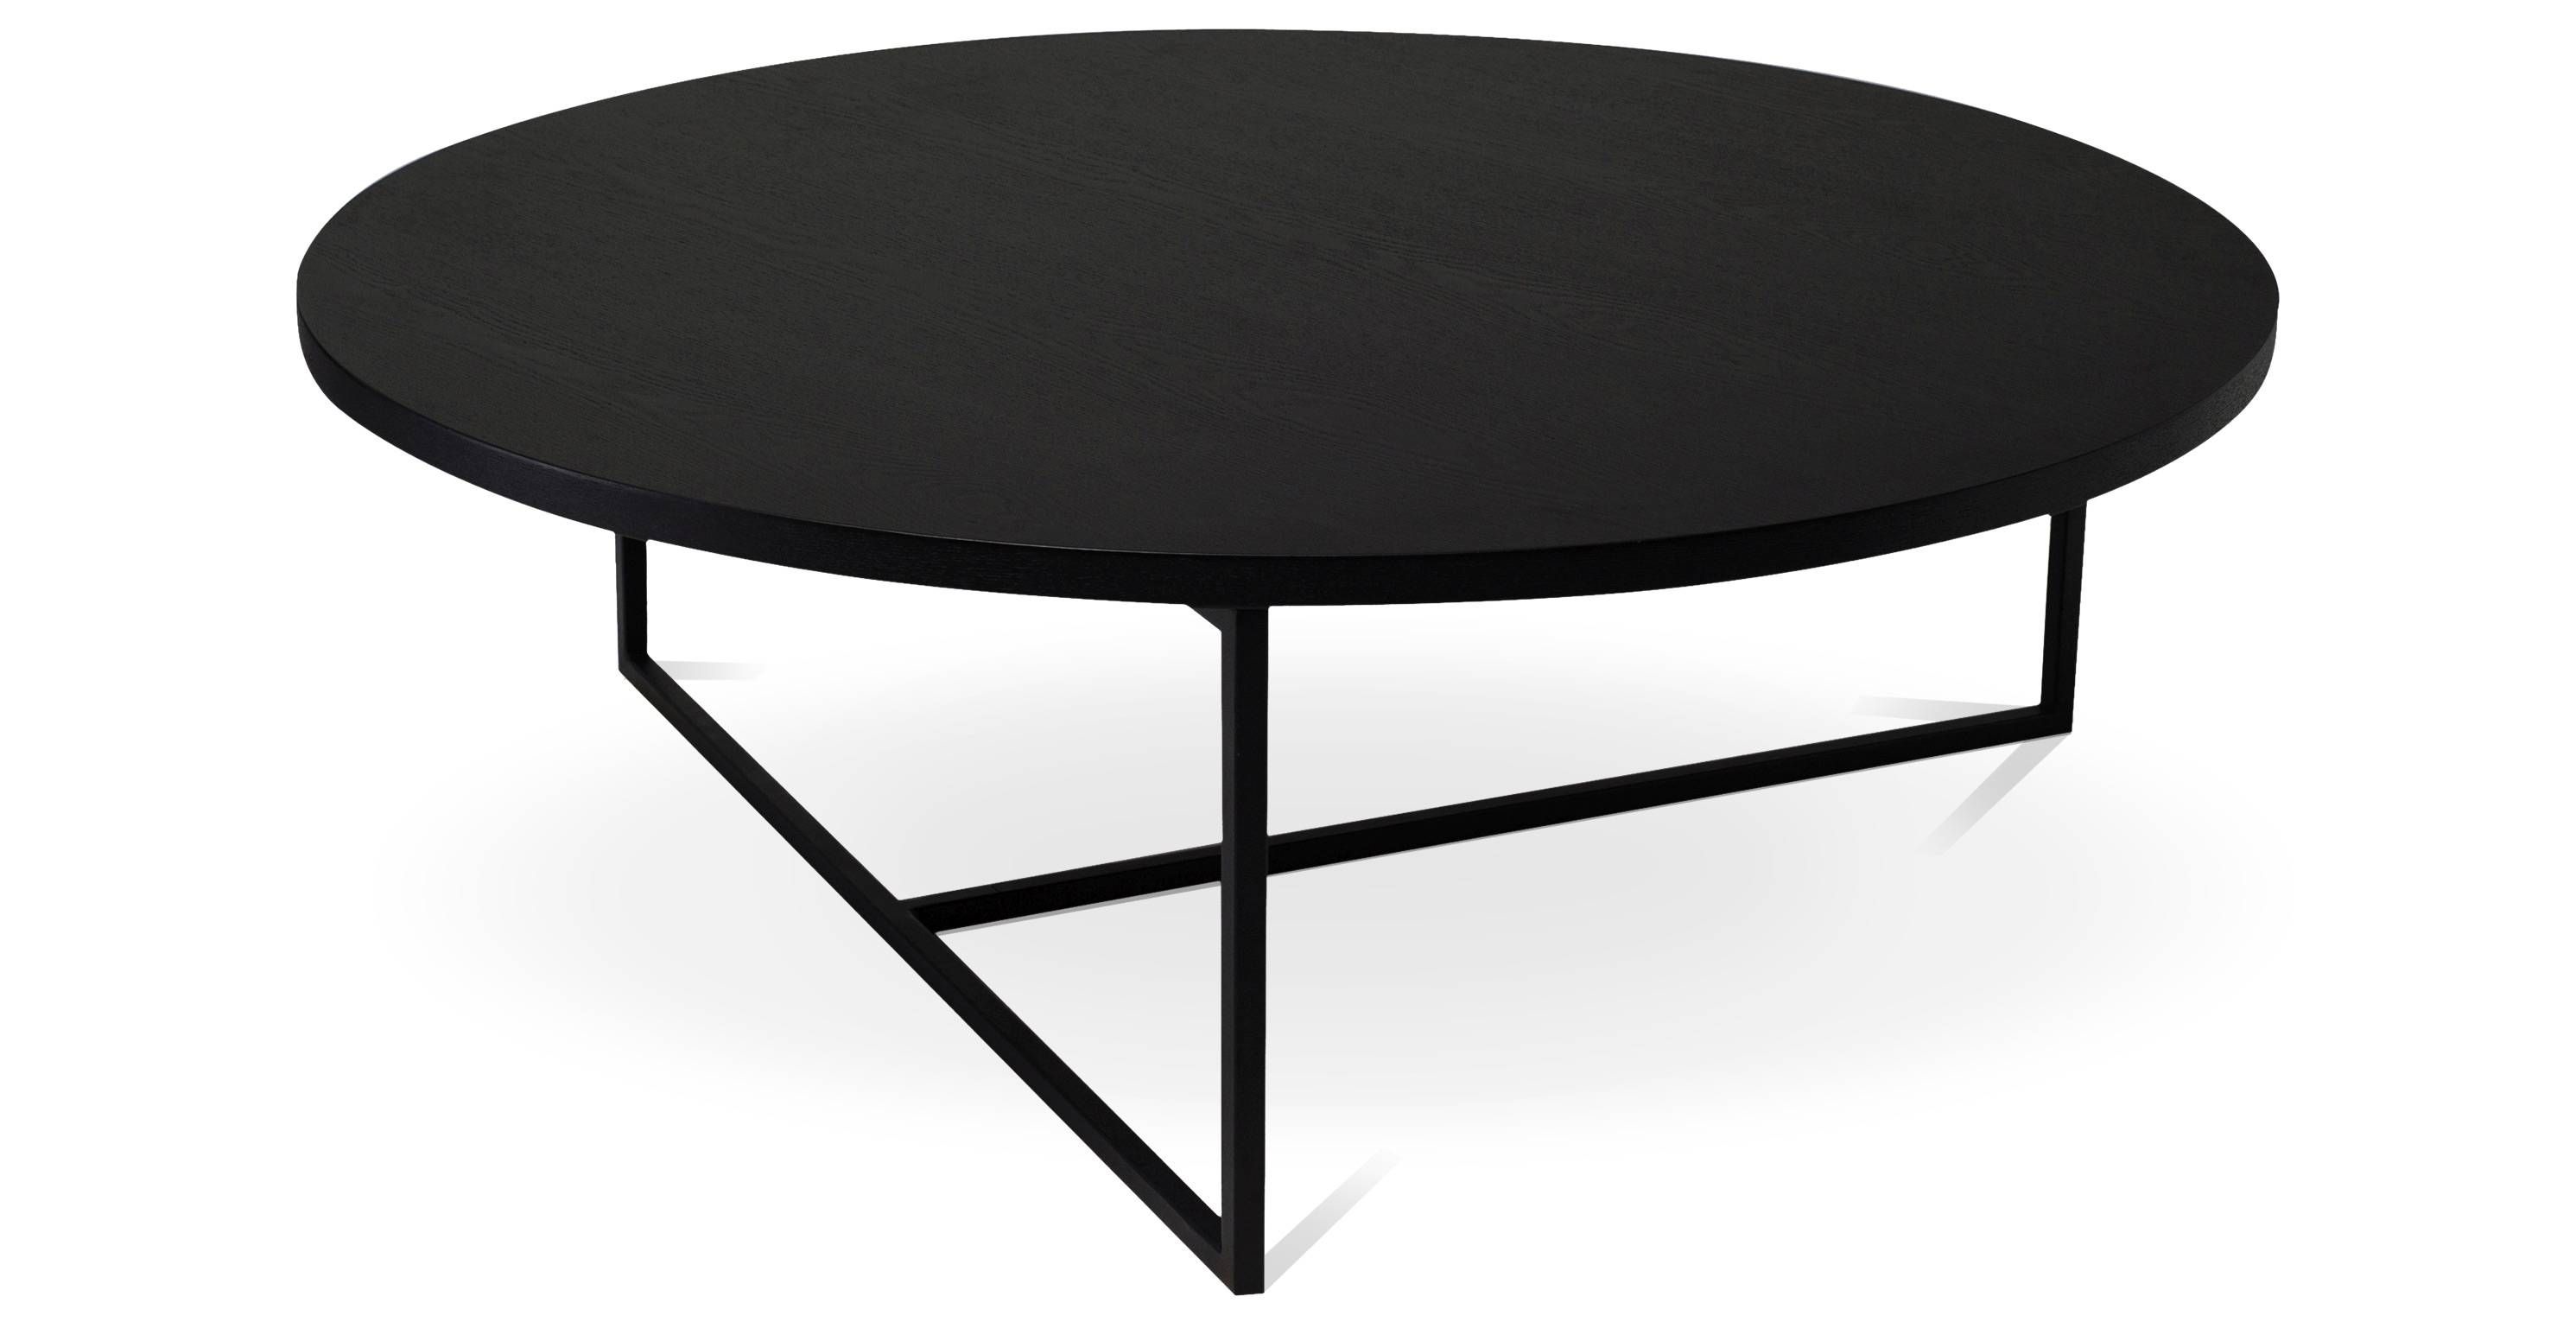 Coffee Table: Enchanting Black Round Coffee Table Designs Round Pertaining To Black Circle Coffee Tables (View 3 of 30)